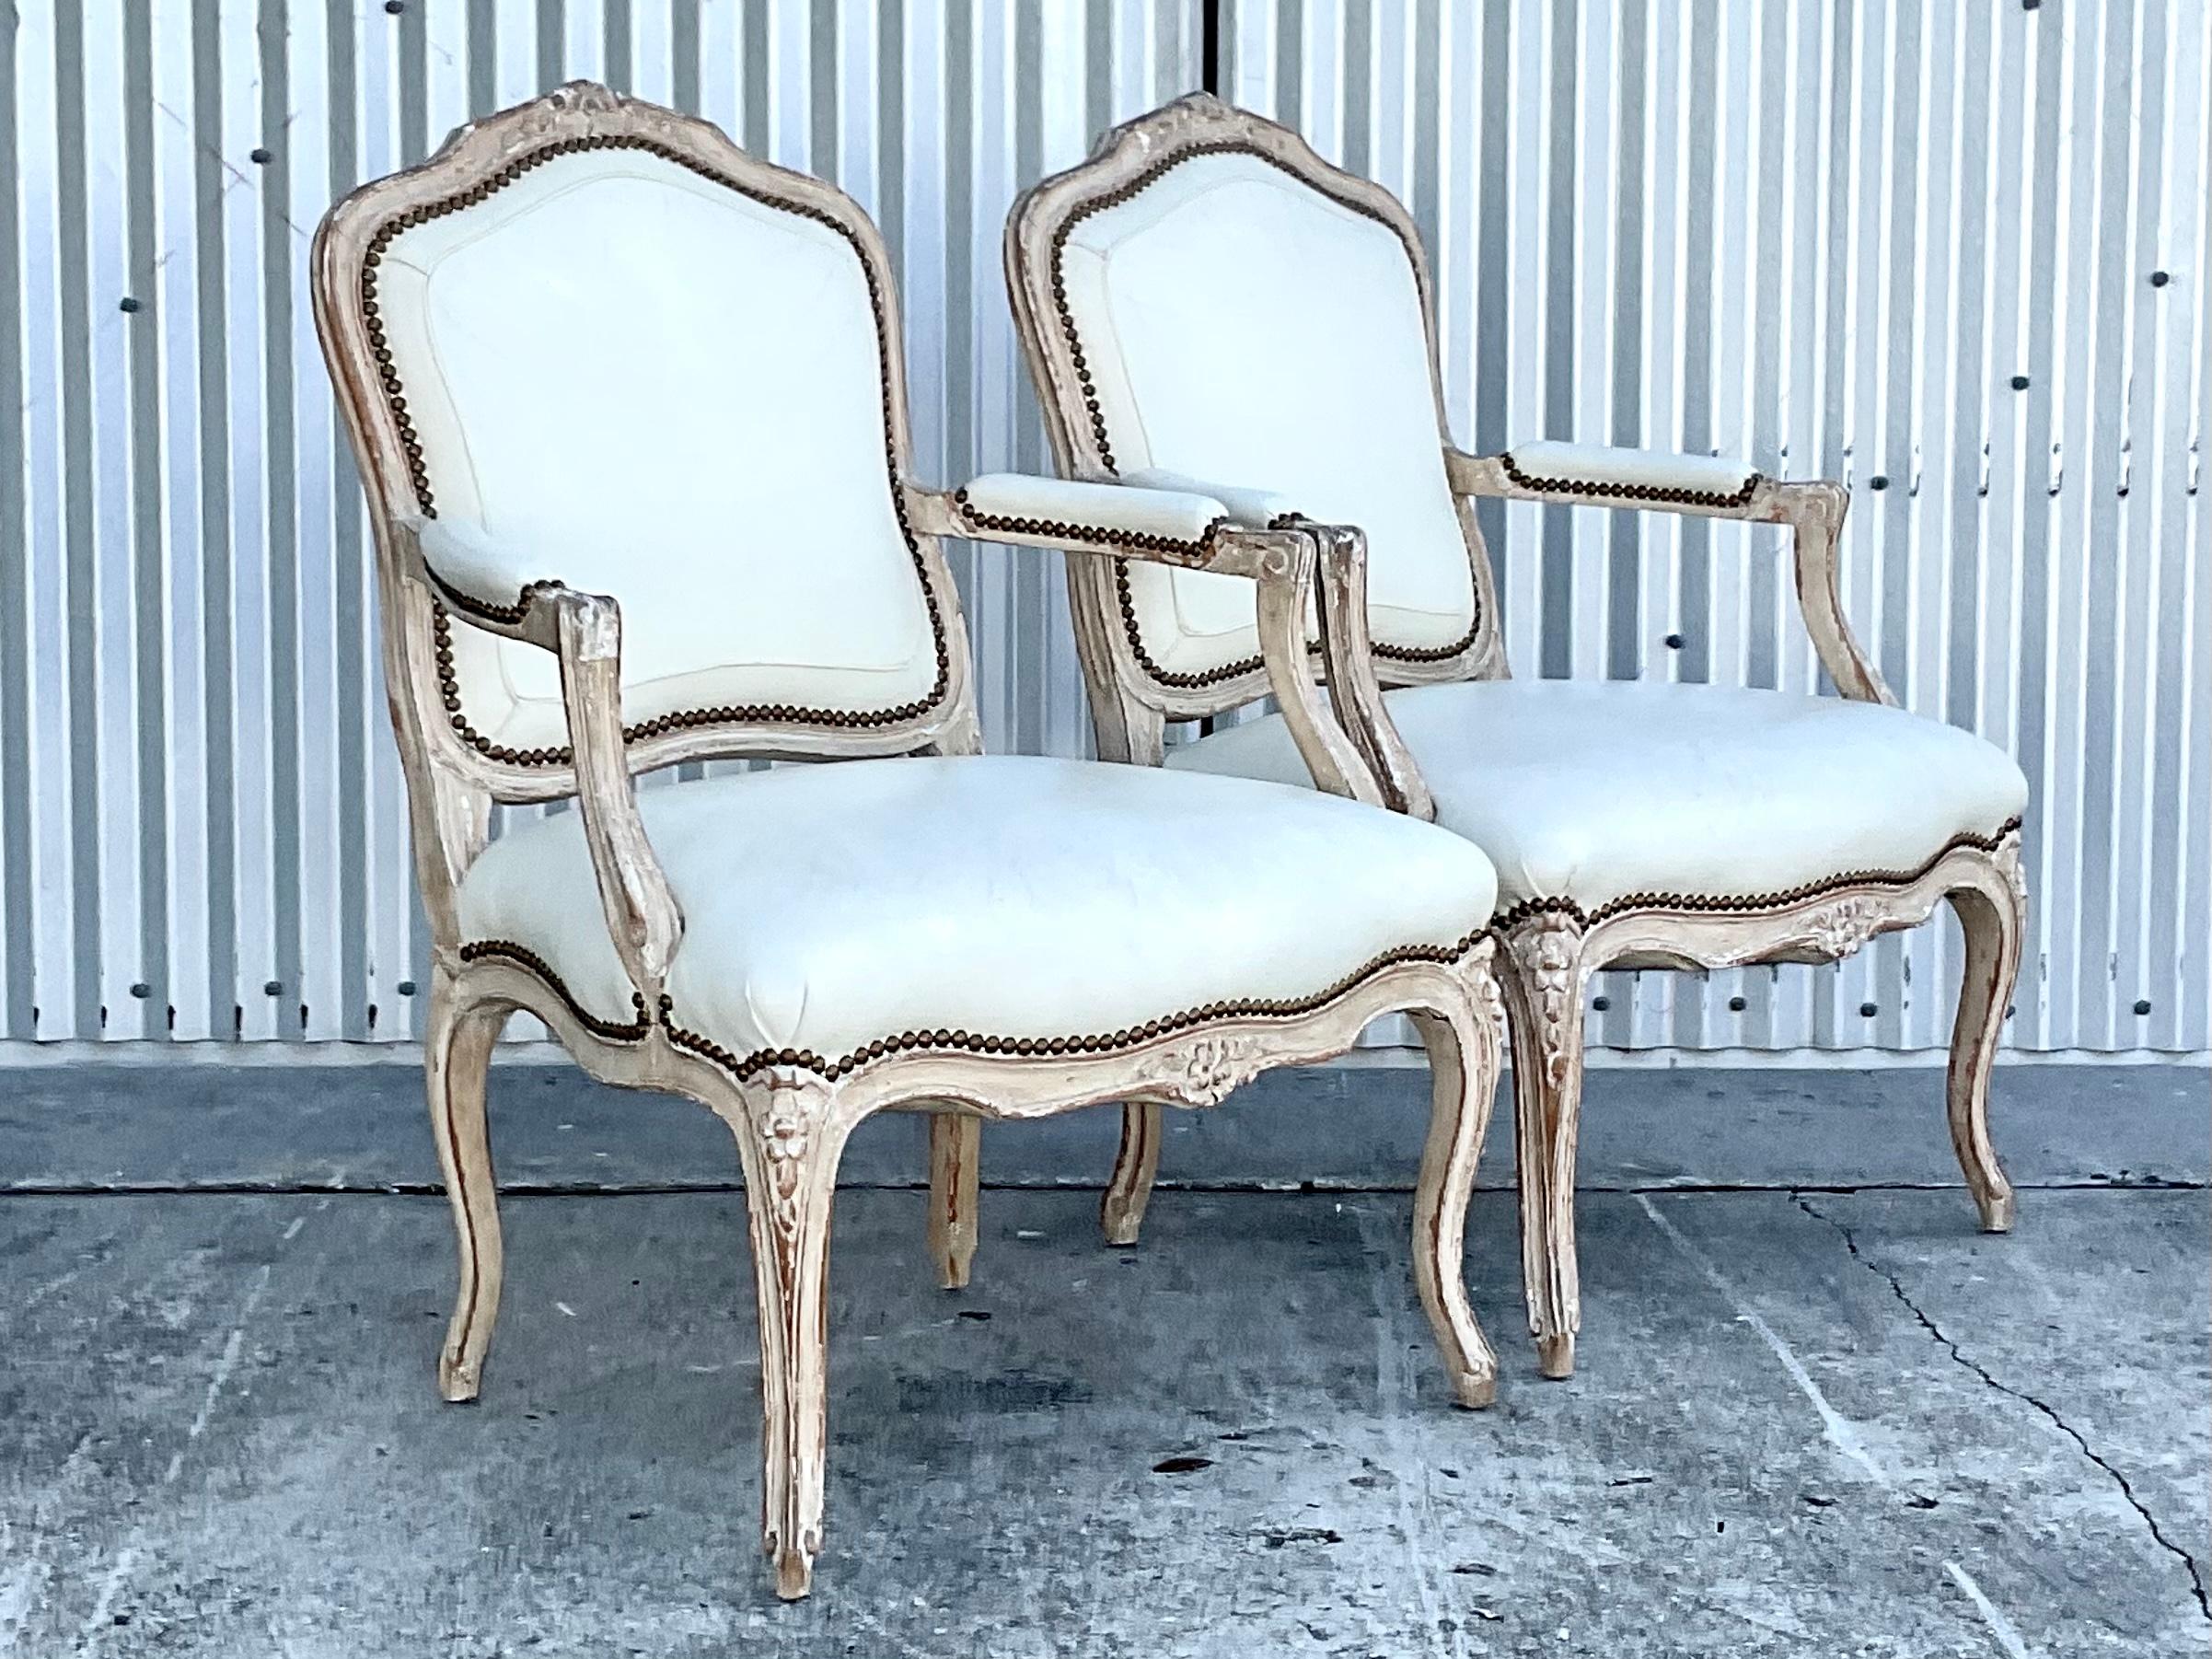 Incredible pair of vintage Regency Bergere chairs. Beautiful cream colored leather with lots of seam detail and brass tacks. Shantung silk back panels and a cerused finish wood frame. Acquired from a Palm Beach estate.